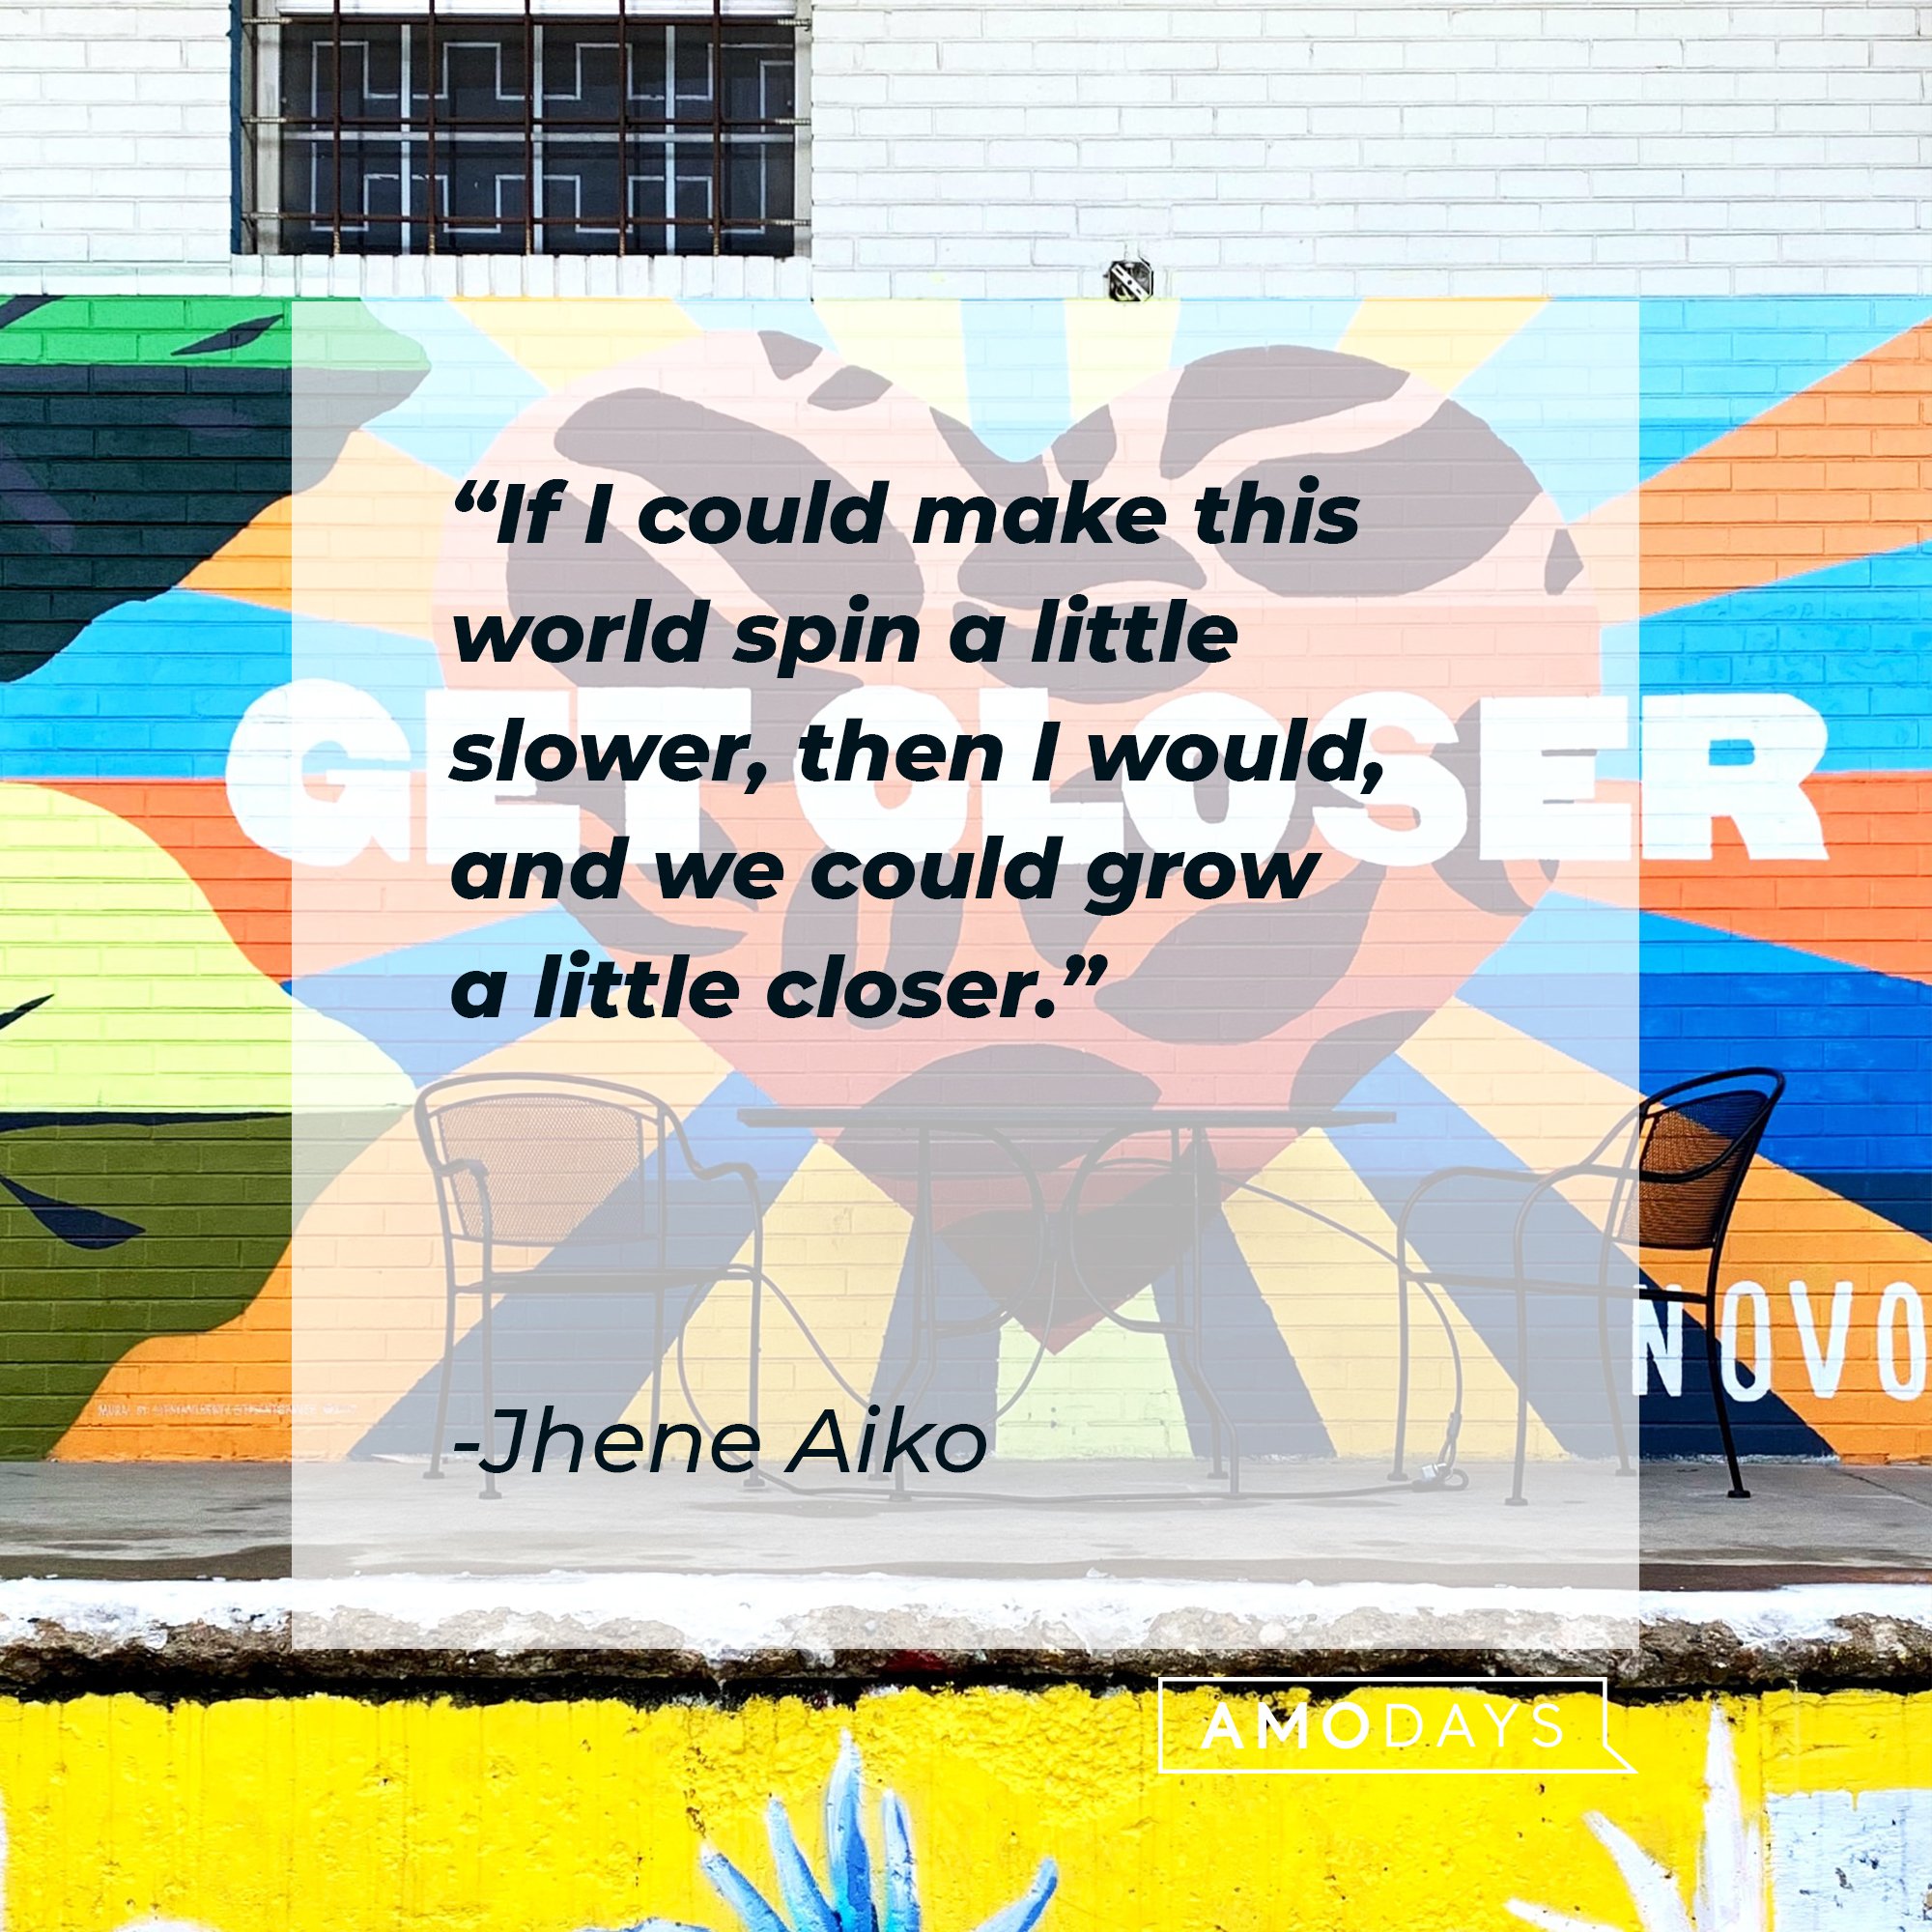  Jhene Aiko's quote: "If I could make this world spin a little slower, then I would, and we could grow a little closer." | Image: AmoDays